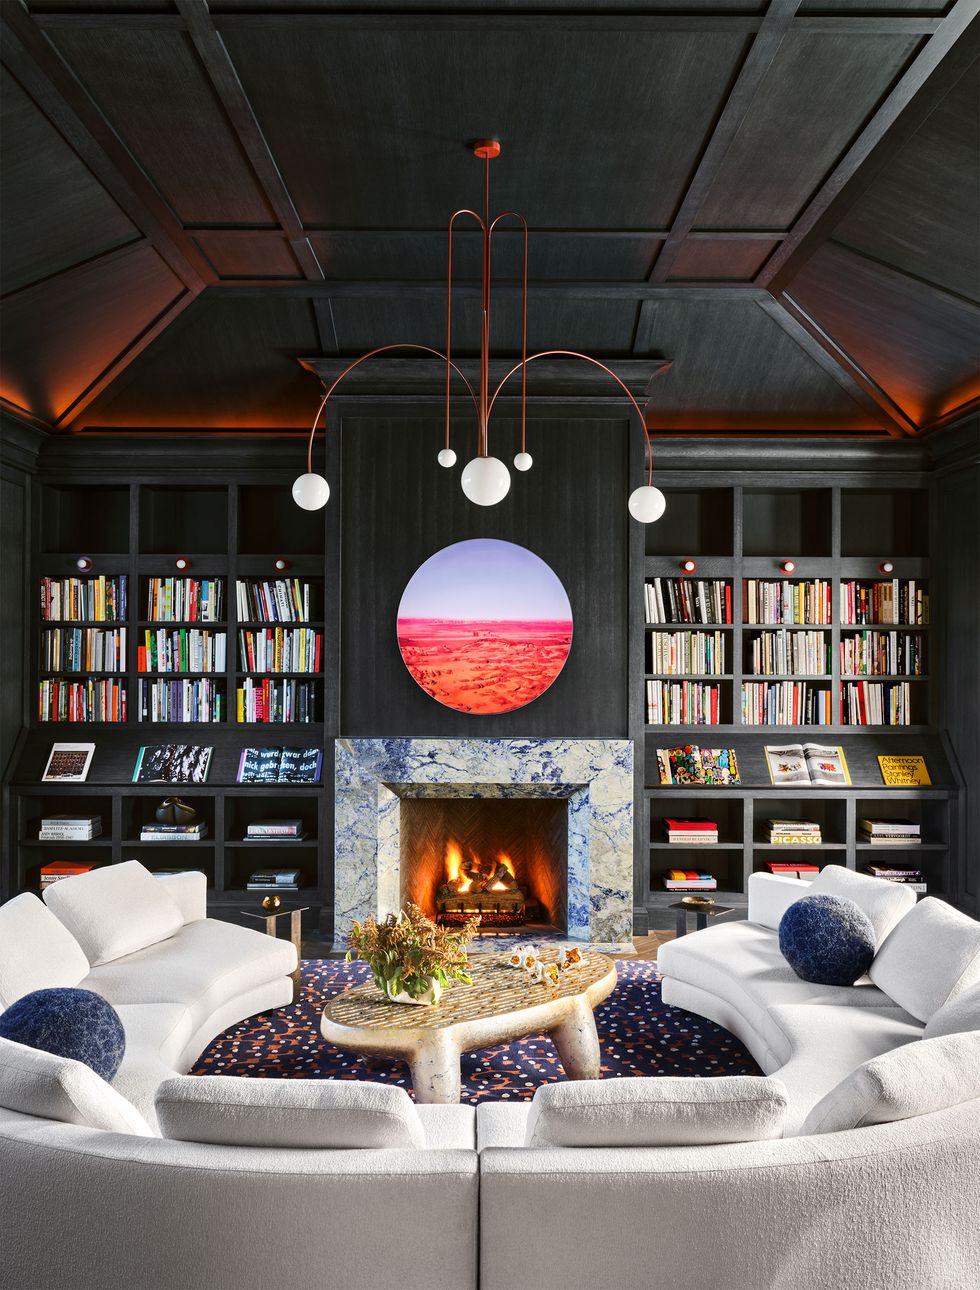 A marble fireplace is flanked by dark wood bookshelves, above which is a circular artwork, a chandelier with five spherical lights, a white circular sofa, and a cocktail table.